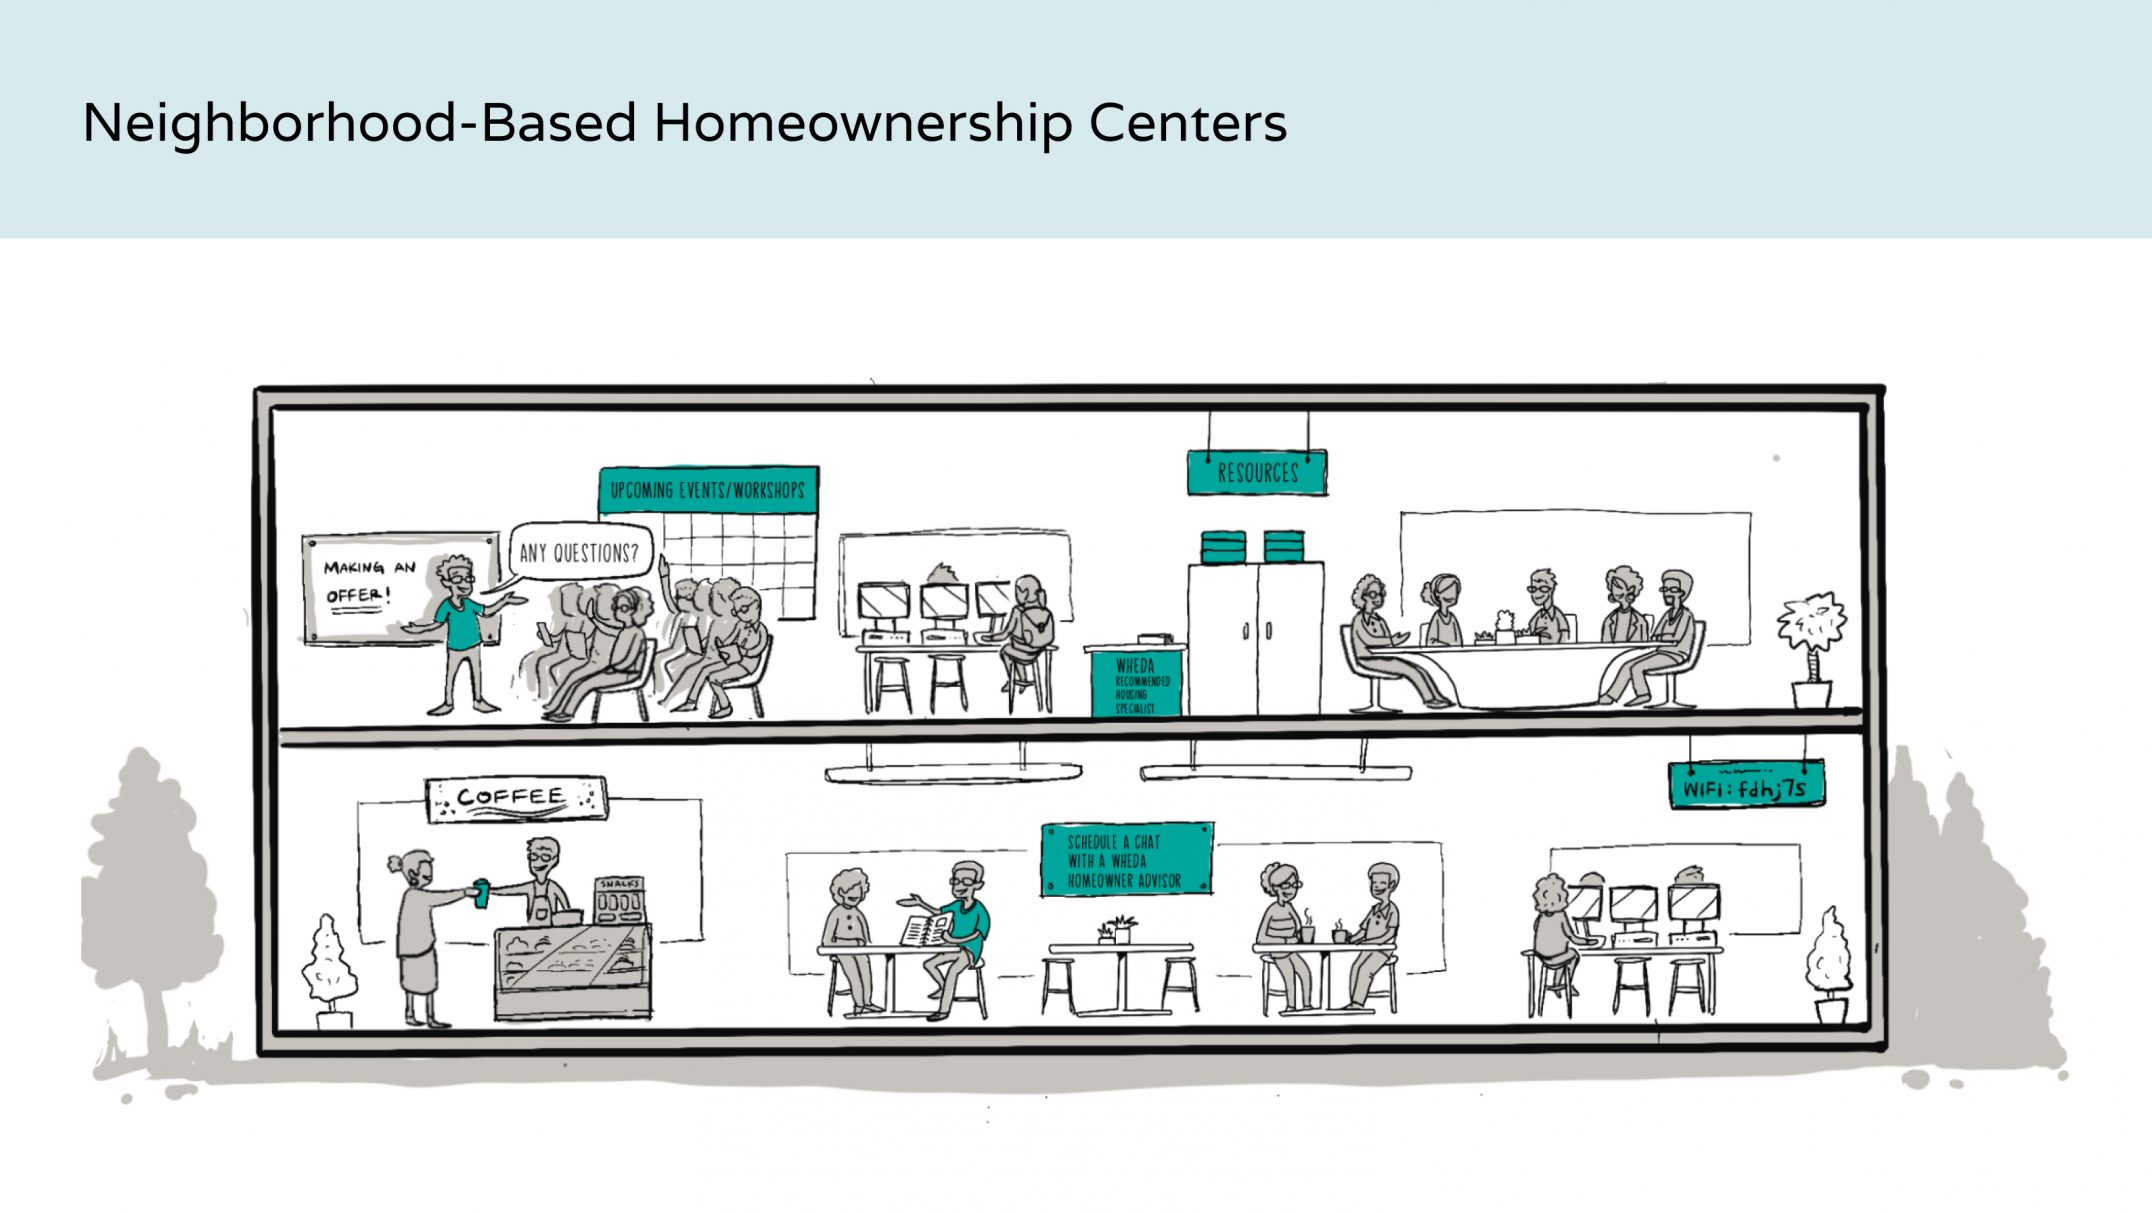 Illustration on white background of a building with about 20 people inside, some at computers, some sitting at tables, and some ordering coffee from a bar. Title says "Neighborhood-Based Homeownership Centers."